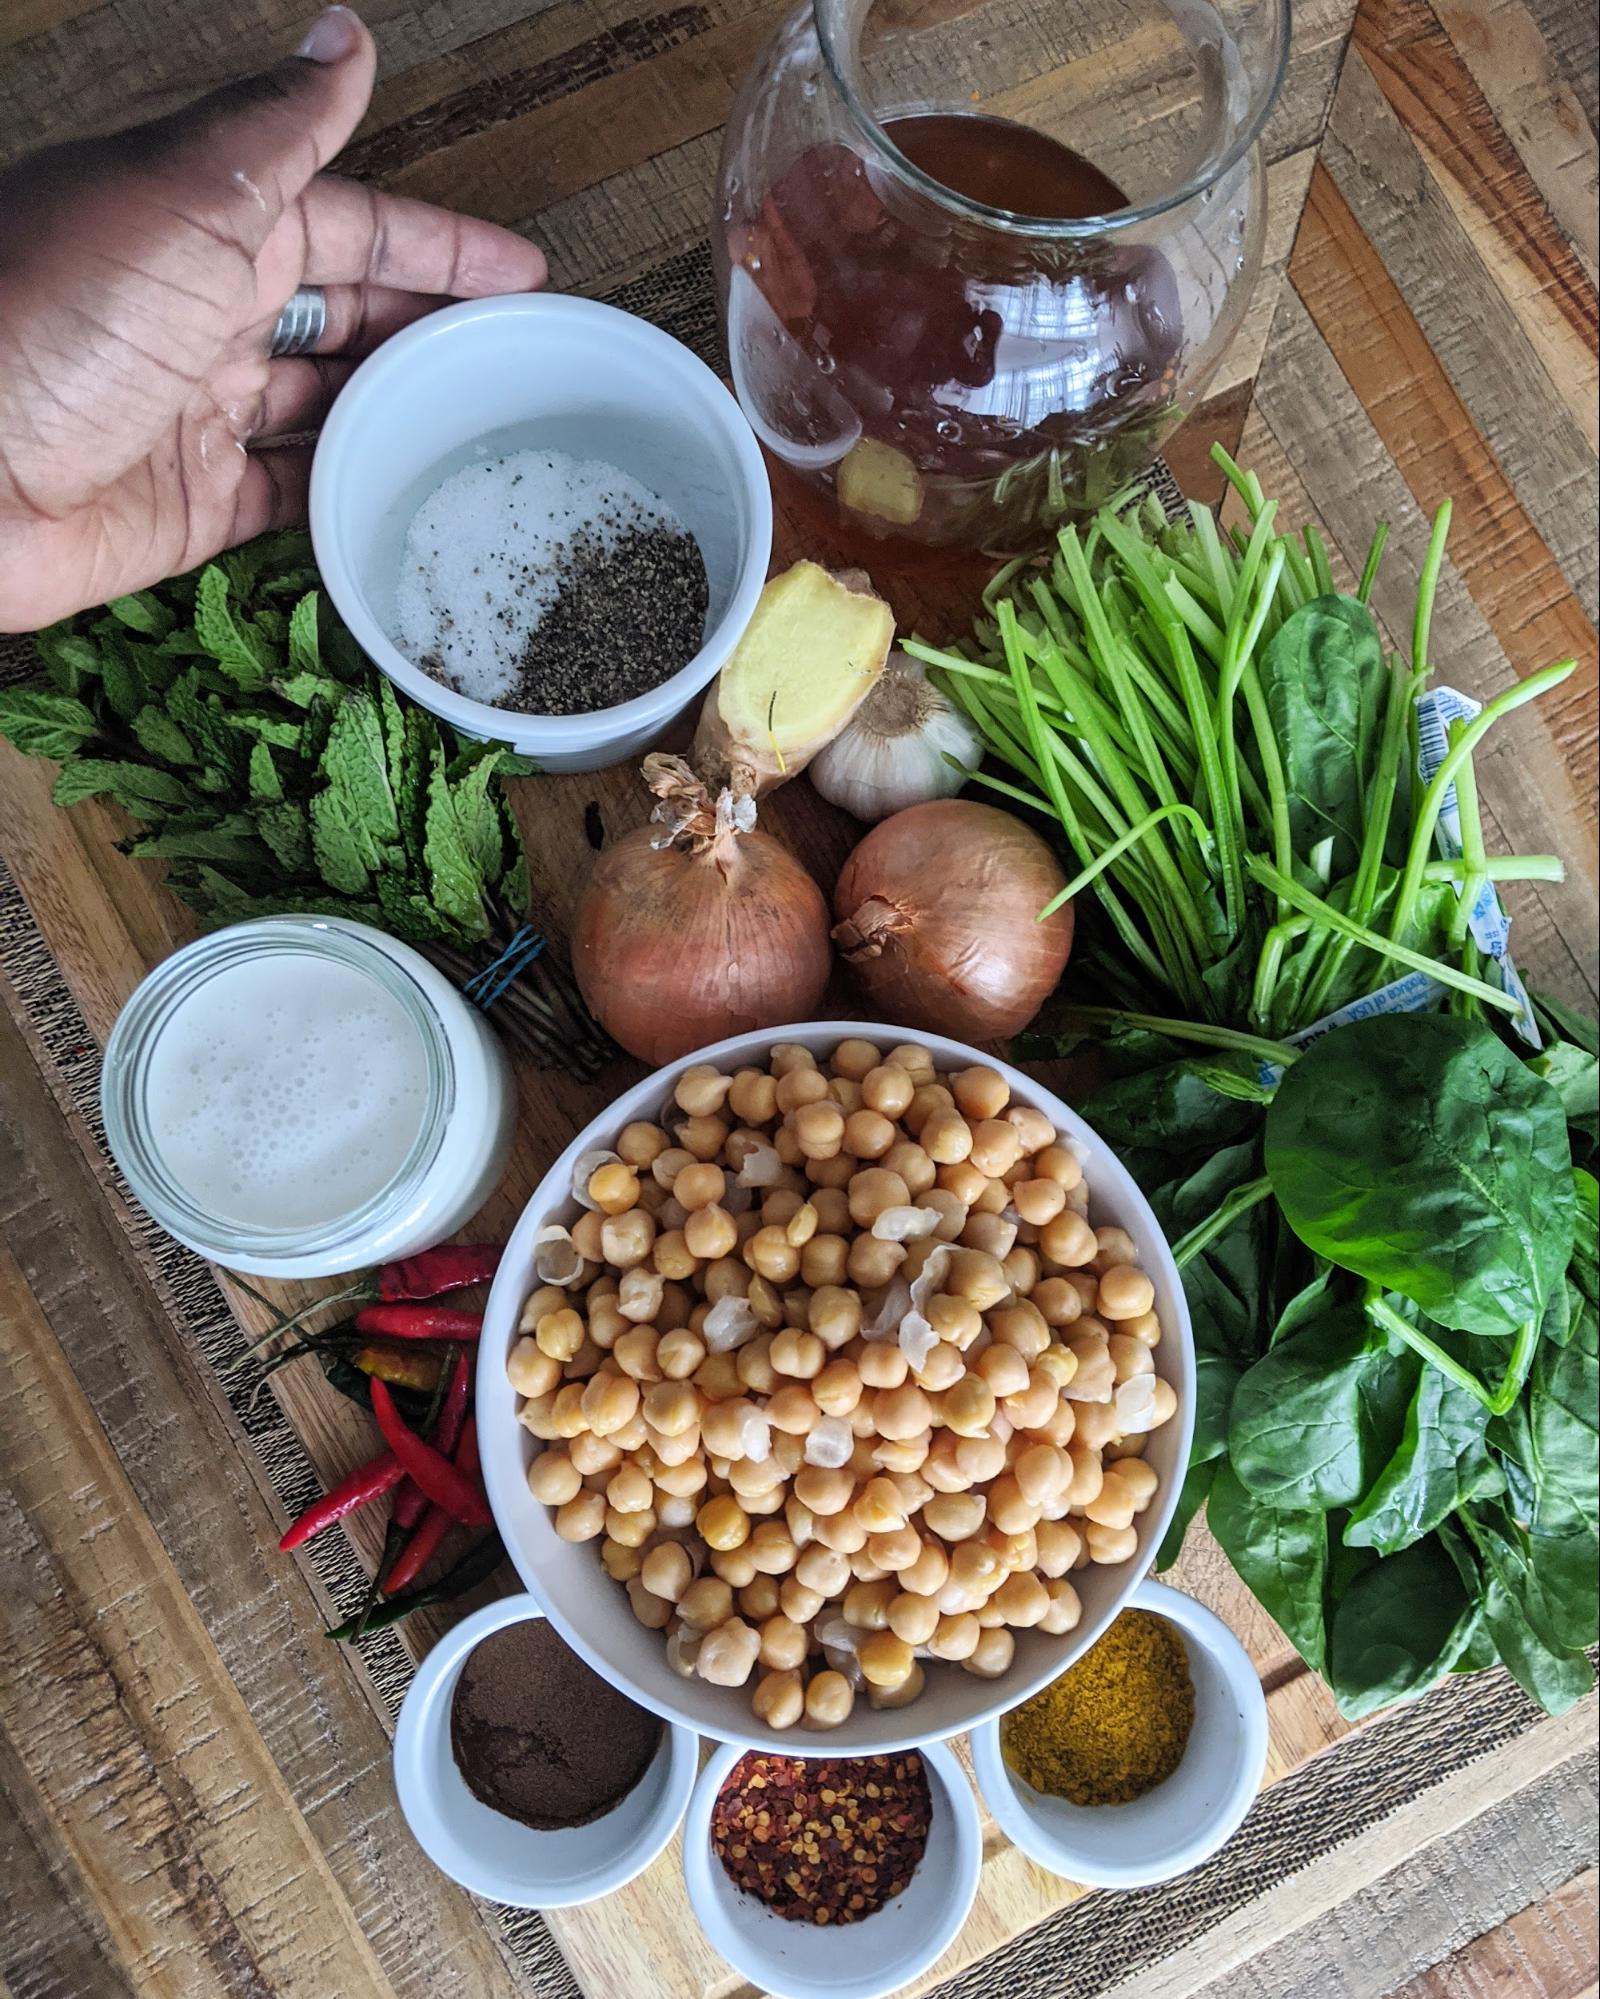 Spiced Chickpea Stew